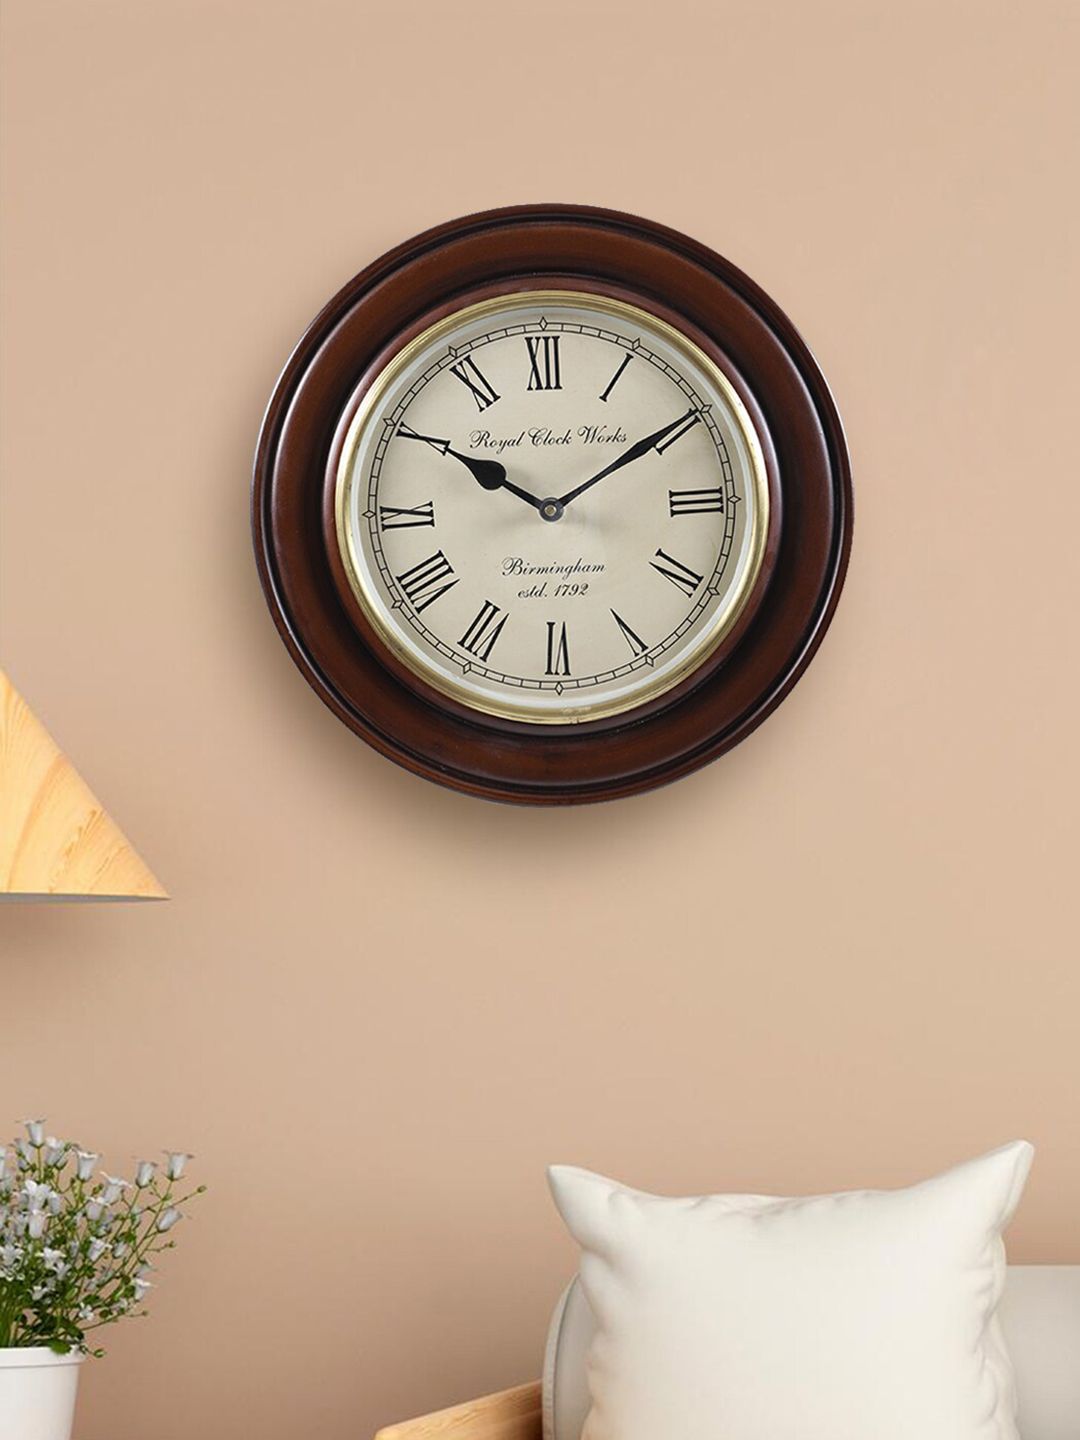 Aapno Rajasthan Brown & Gold-Toned Solid Contemporary Round Analogue Wall Clock 29cm Price in India